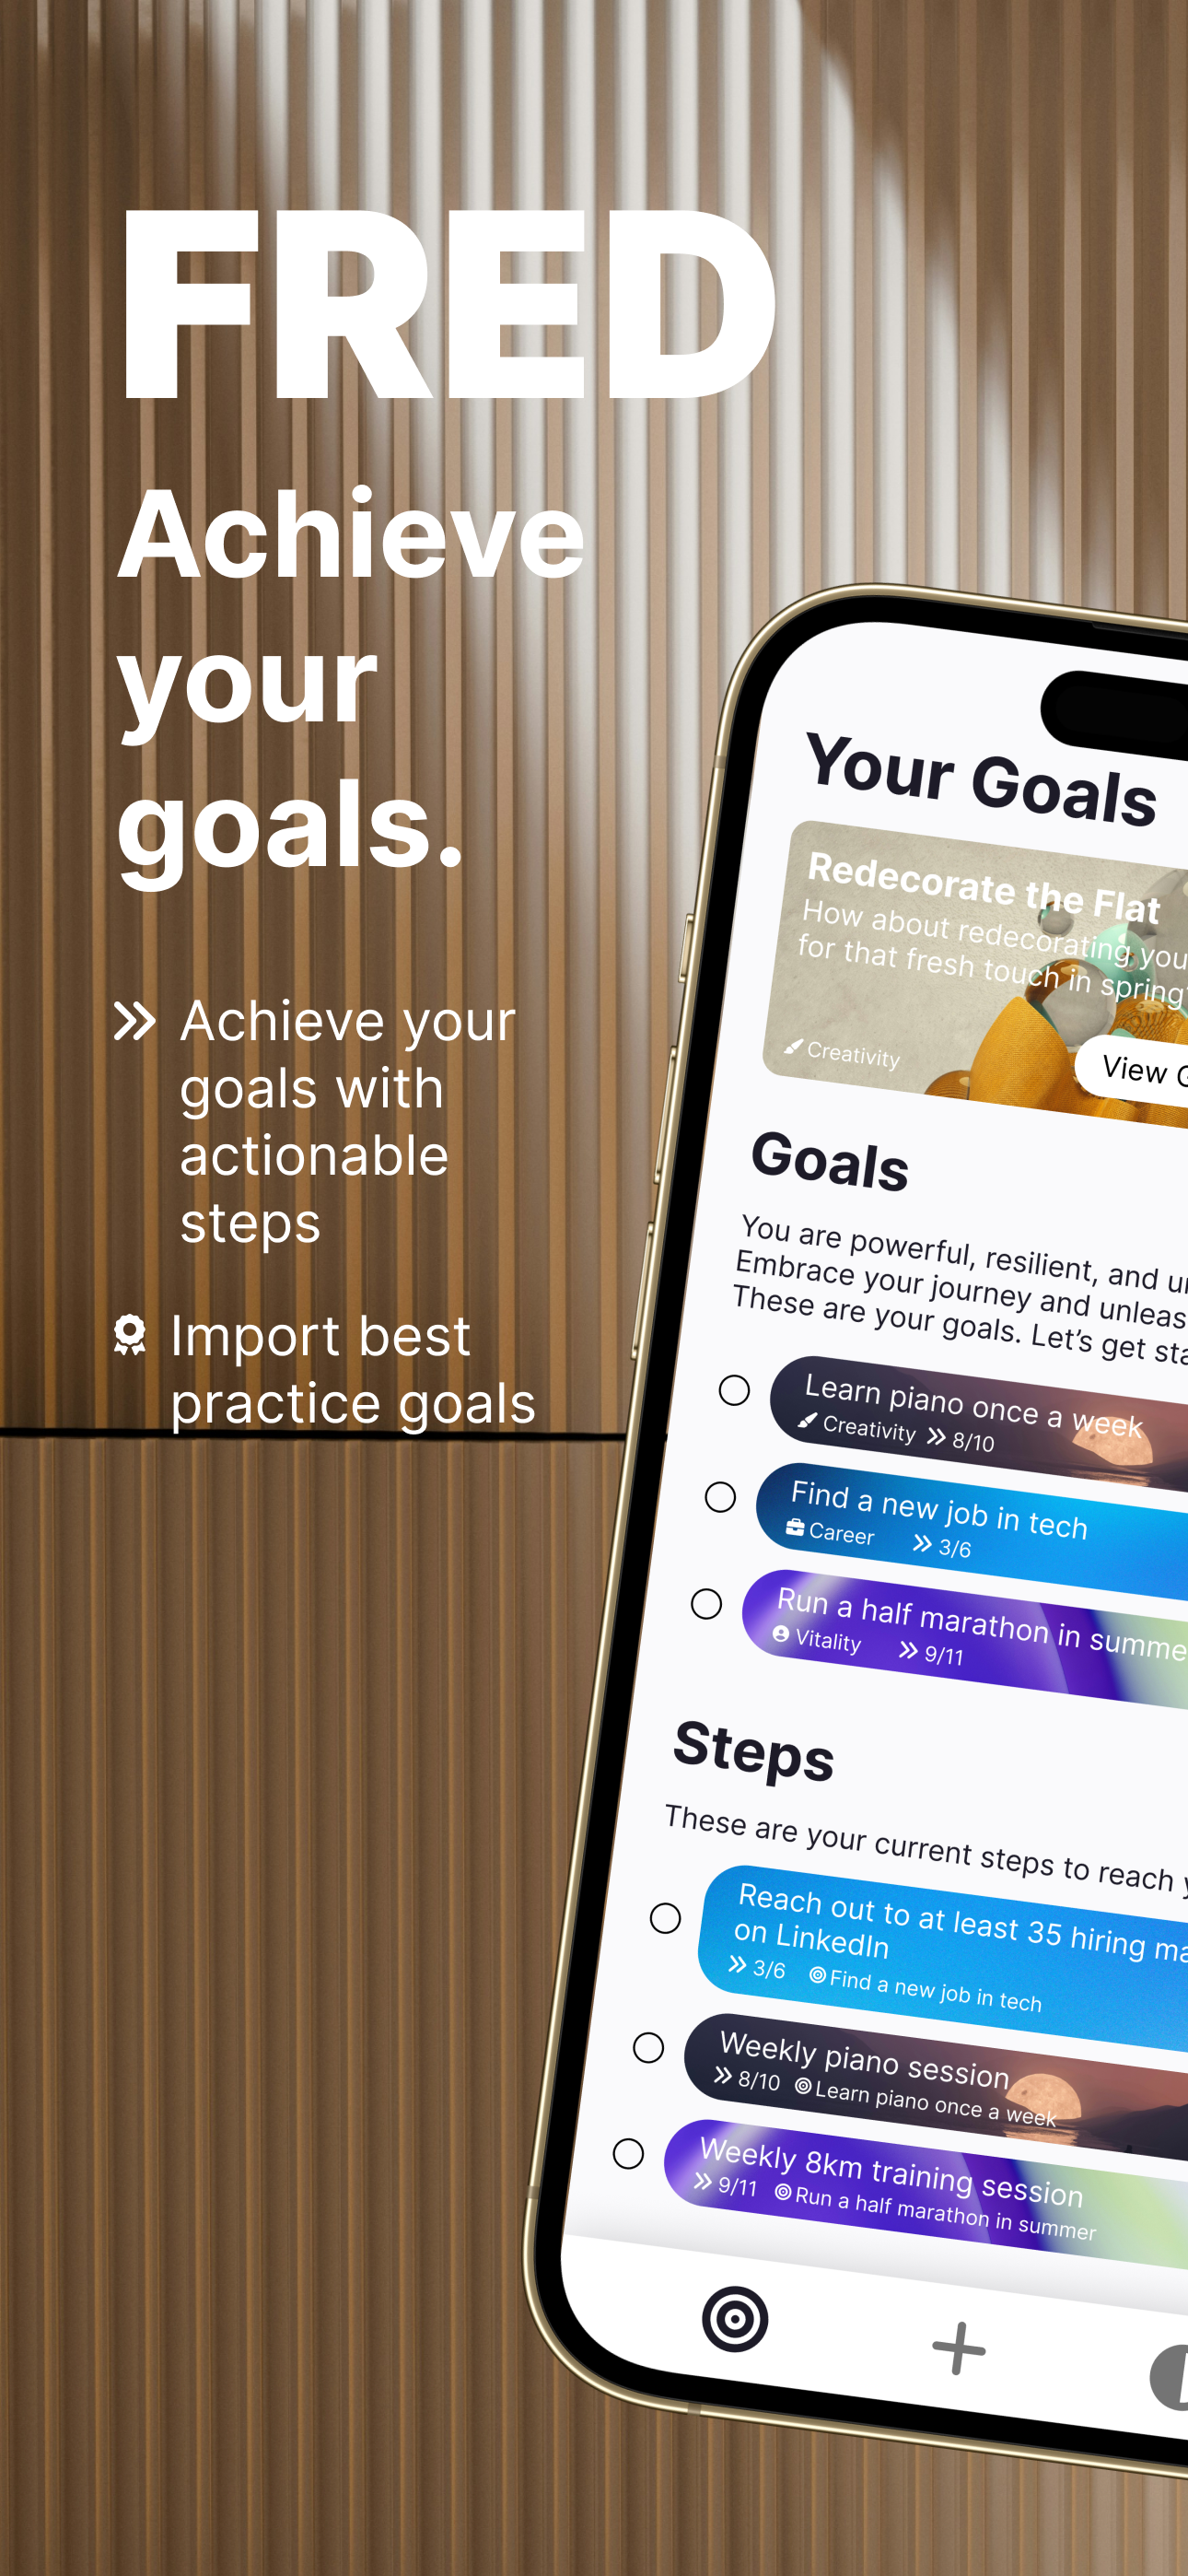 fred-2 - Achieve your goals with Fred